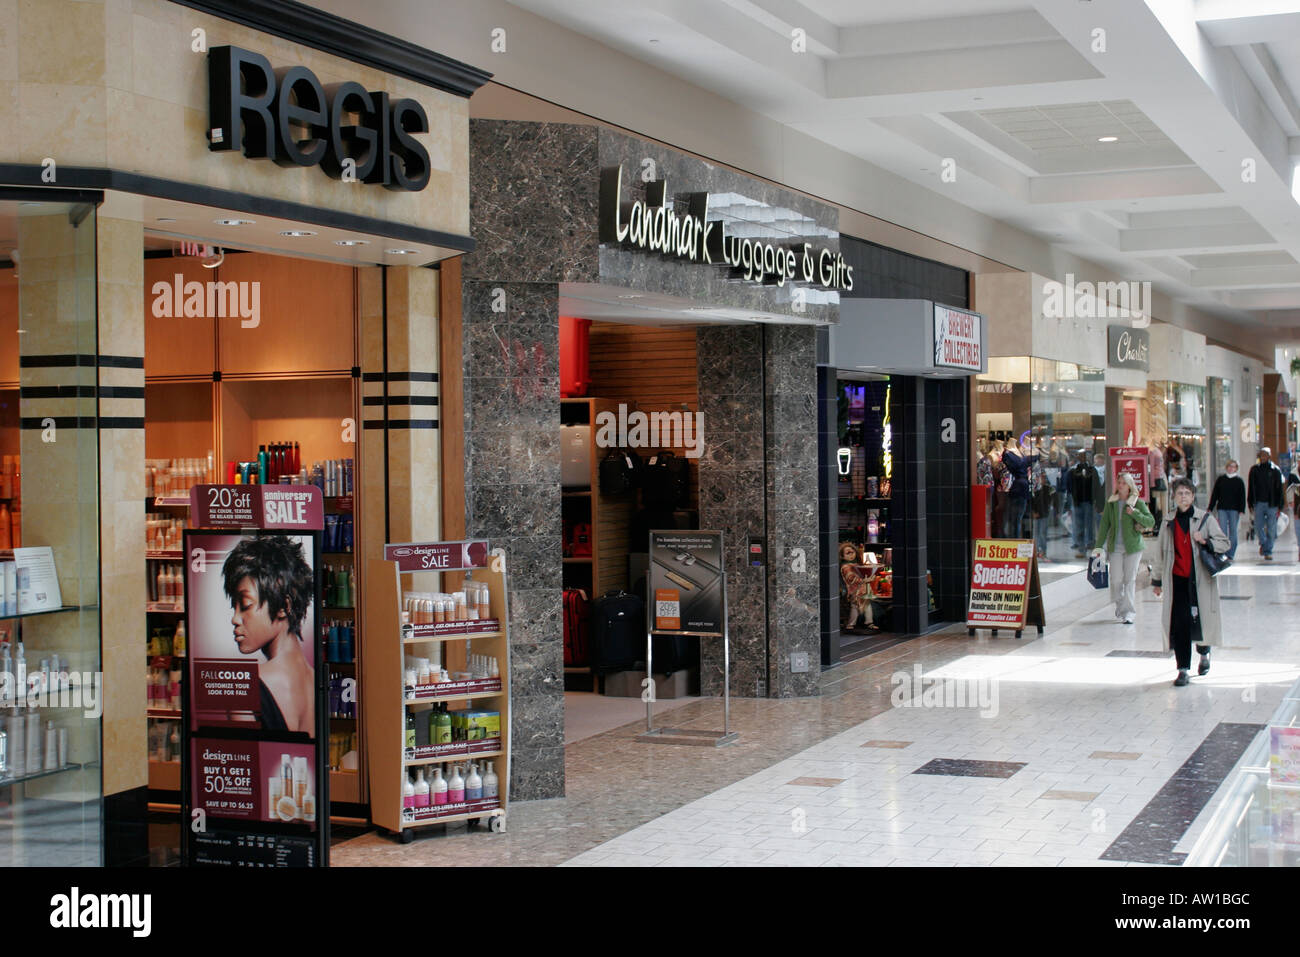 Brookfield Wisconsin,Brookfield Square Mall,stores,Regis,Landmark  luggage,suitcase & Gifts,shoppers,WI061012097 Stock Photo - Alamy